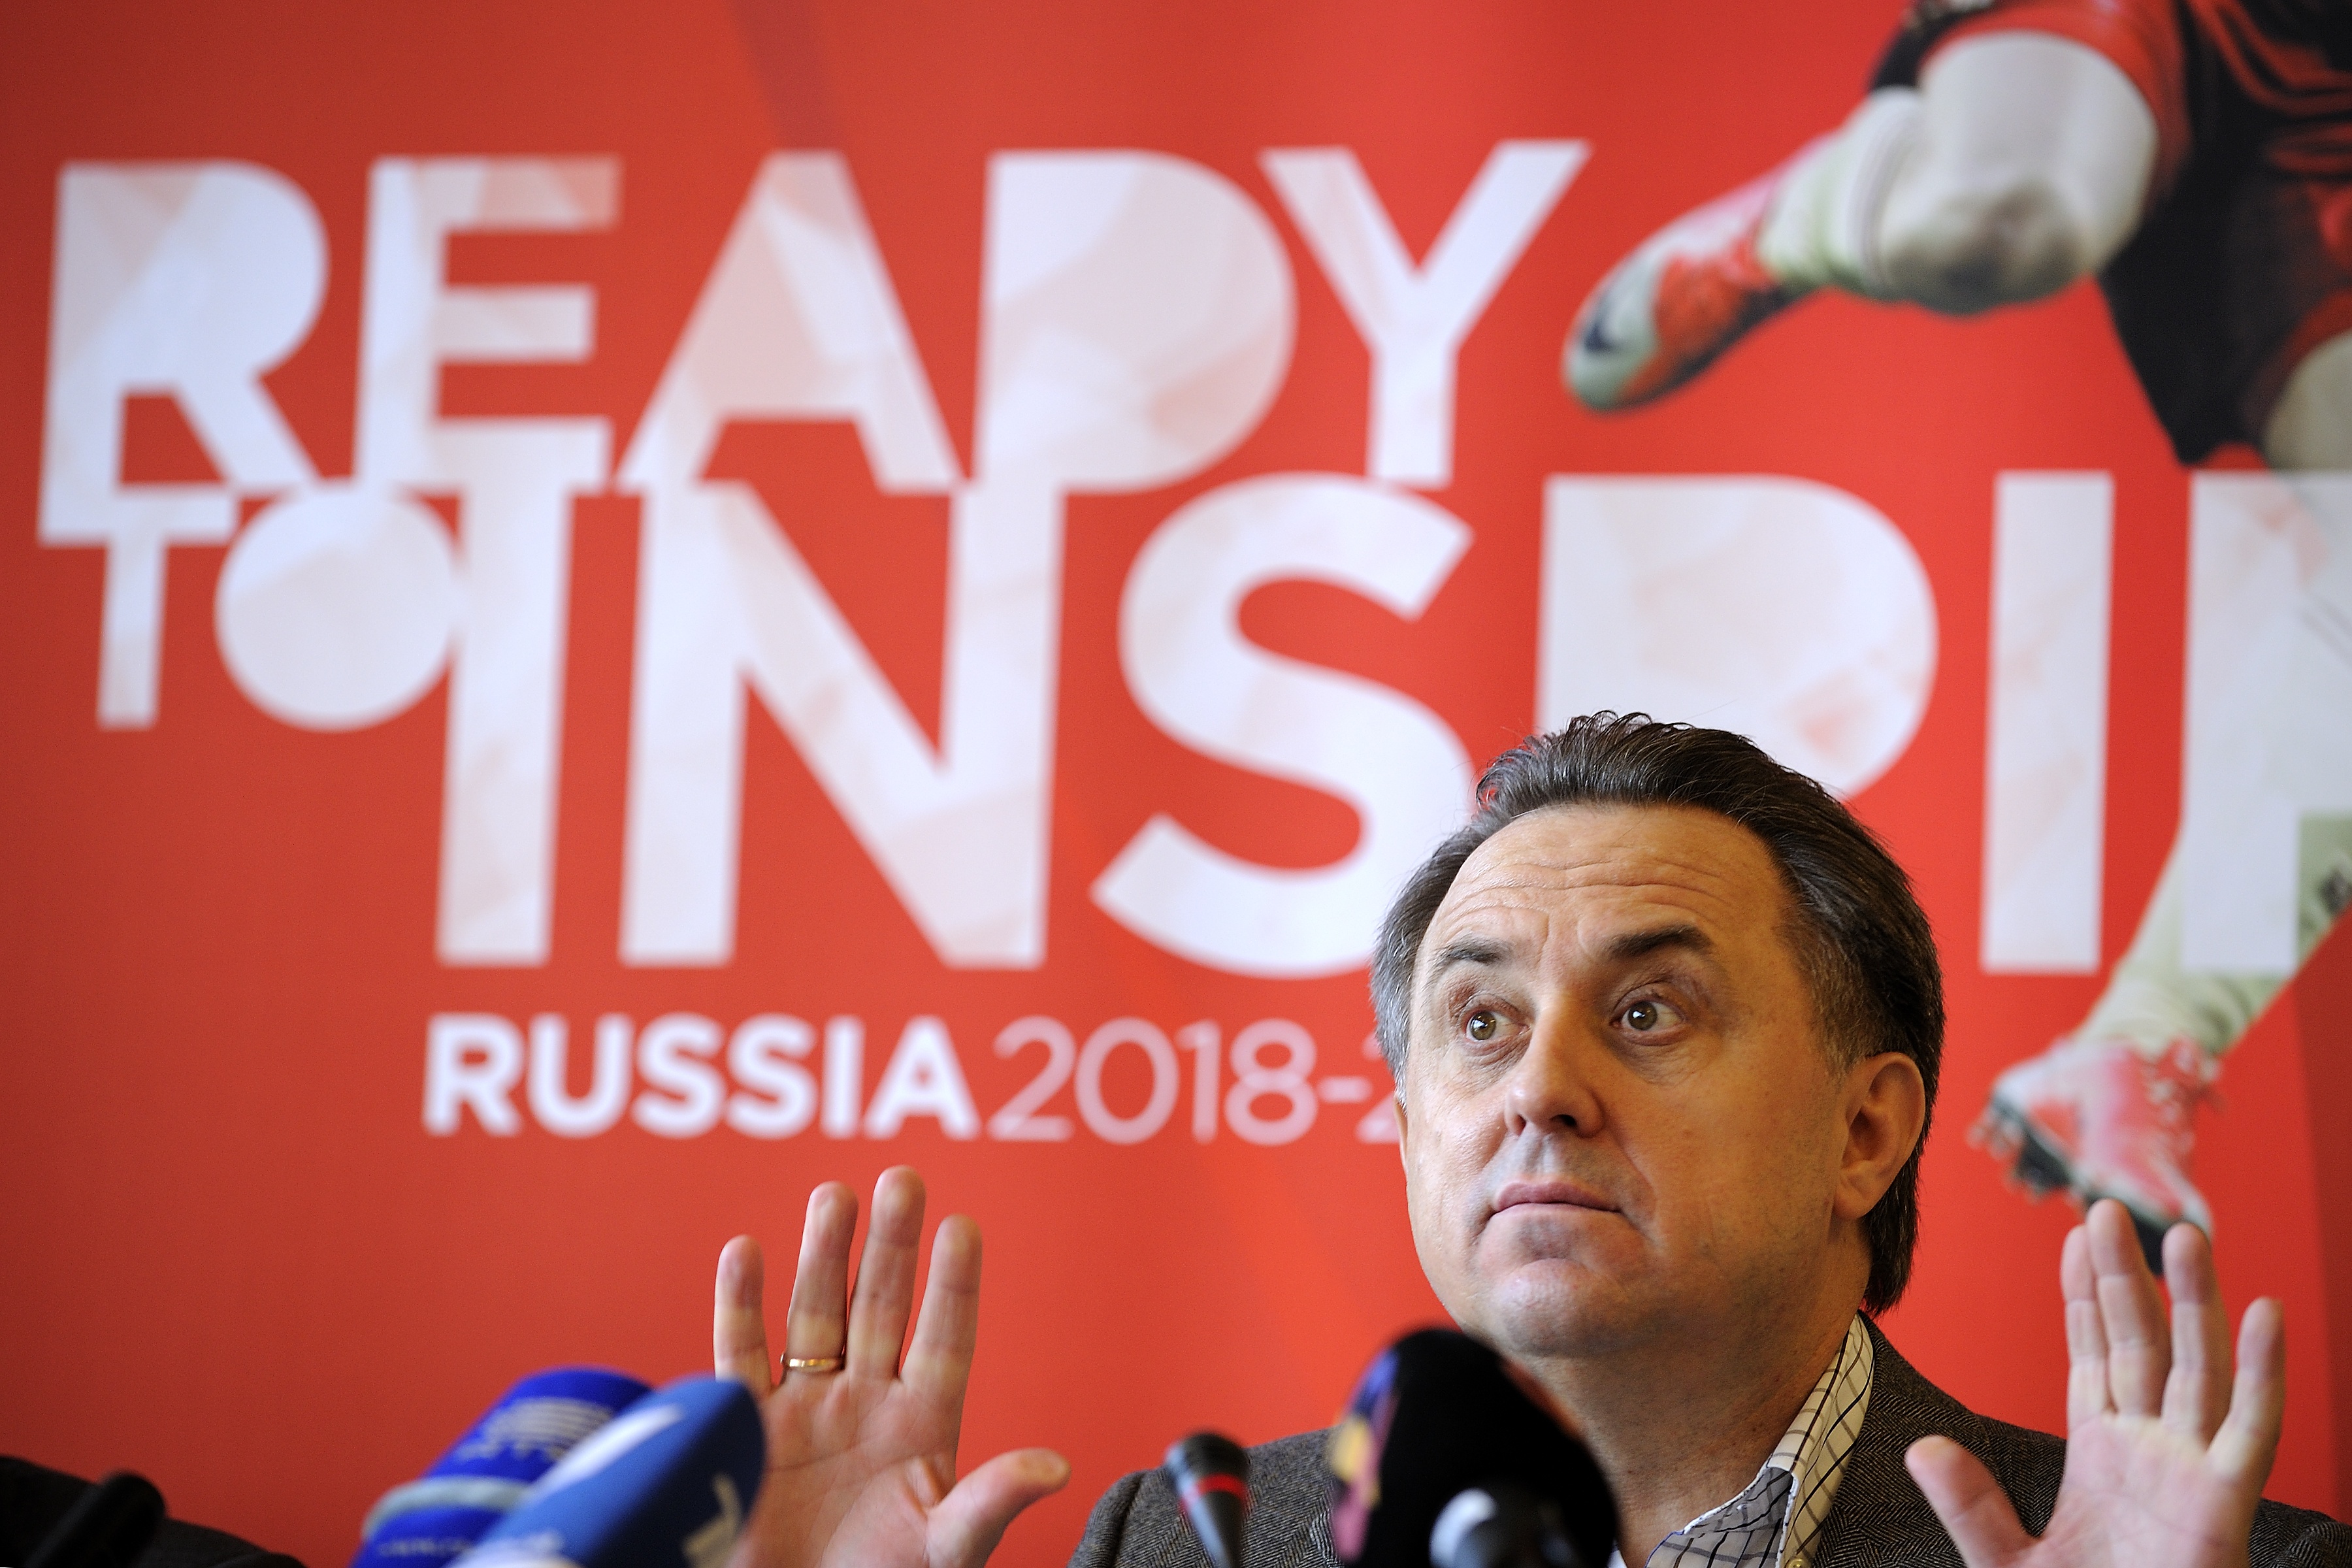 Russian Sports Minister Vitaly Mutko gives a press conference on Nov. 30, 2010 in Zurich before his country's 2018 World Cup bid to world football's ruling body FIFA. FABRICE COFFRINI—AFP/Getty Images (FABRICE COFFRINI—AFP/Getty Images)